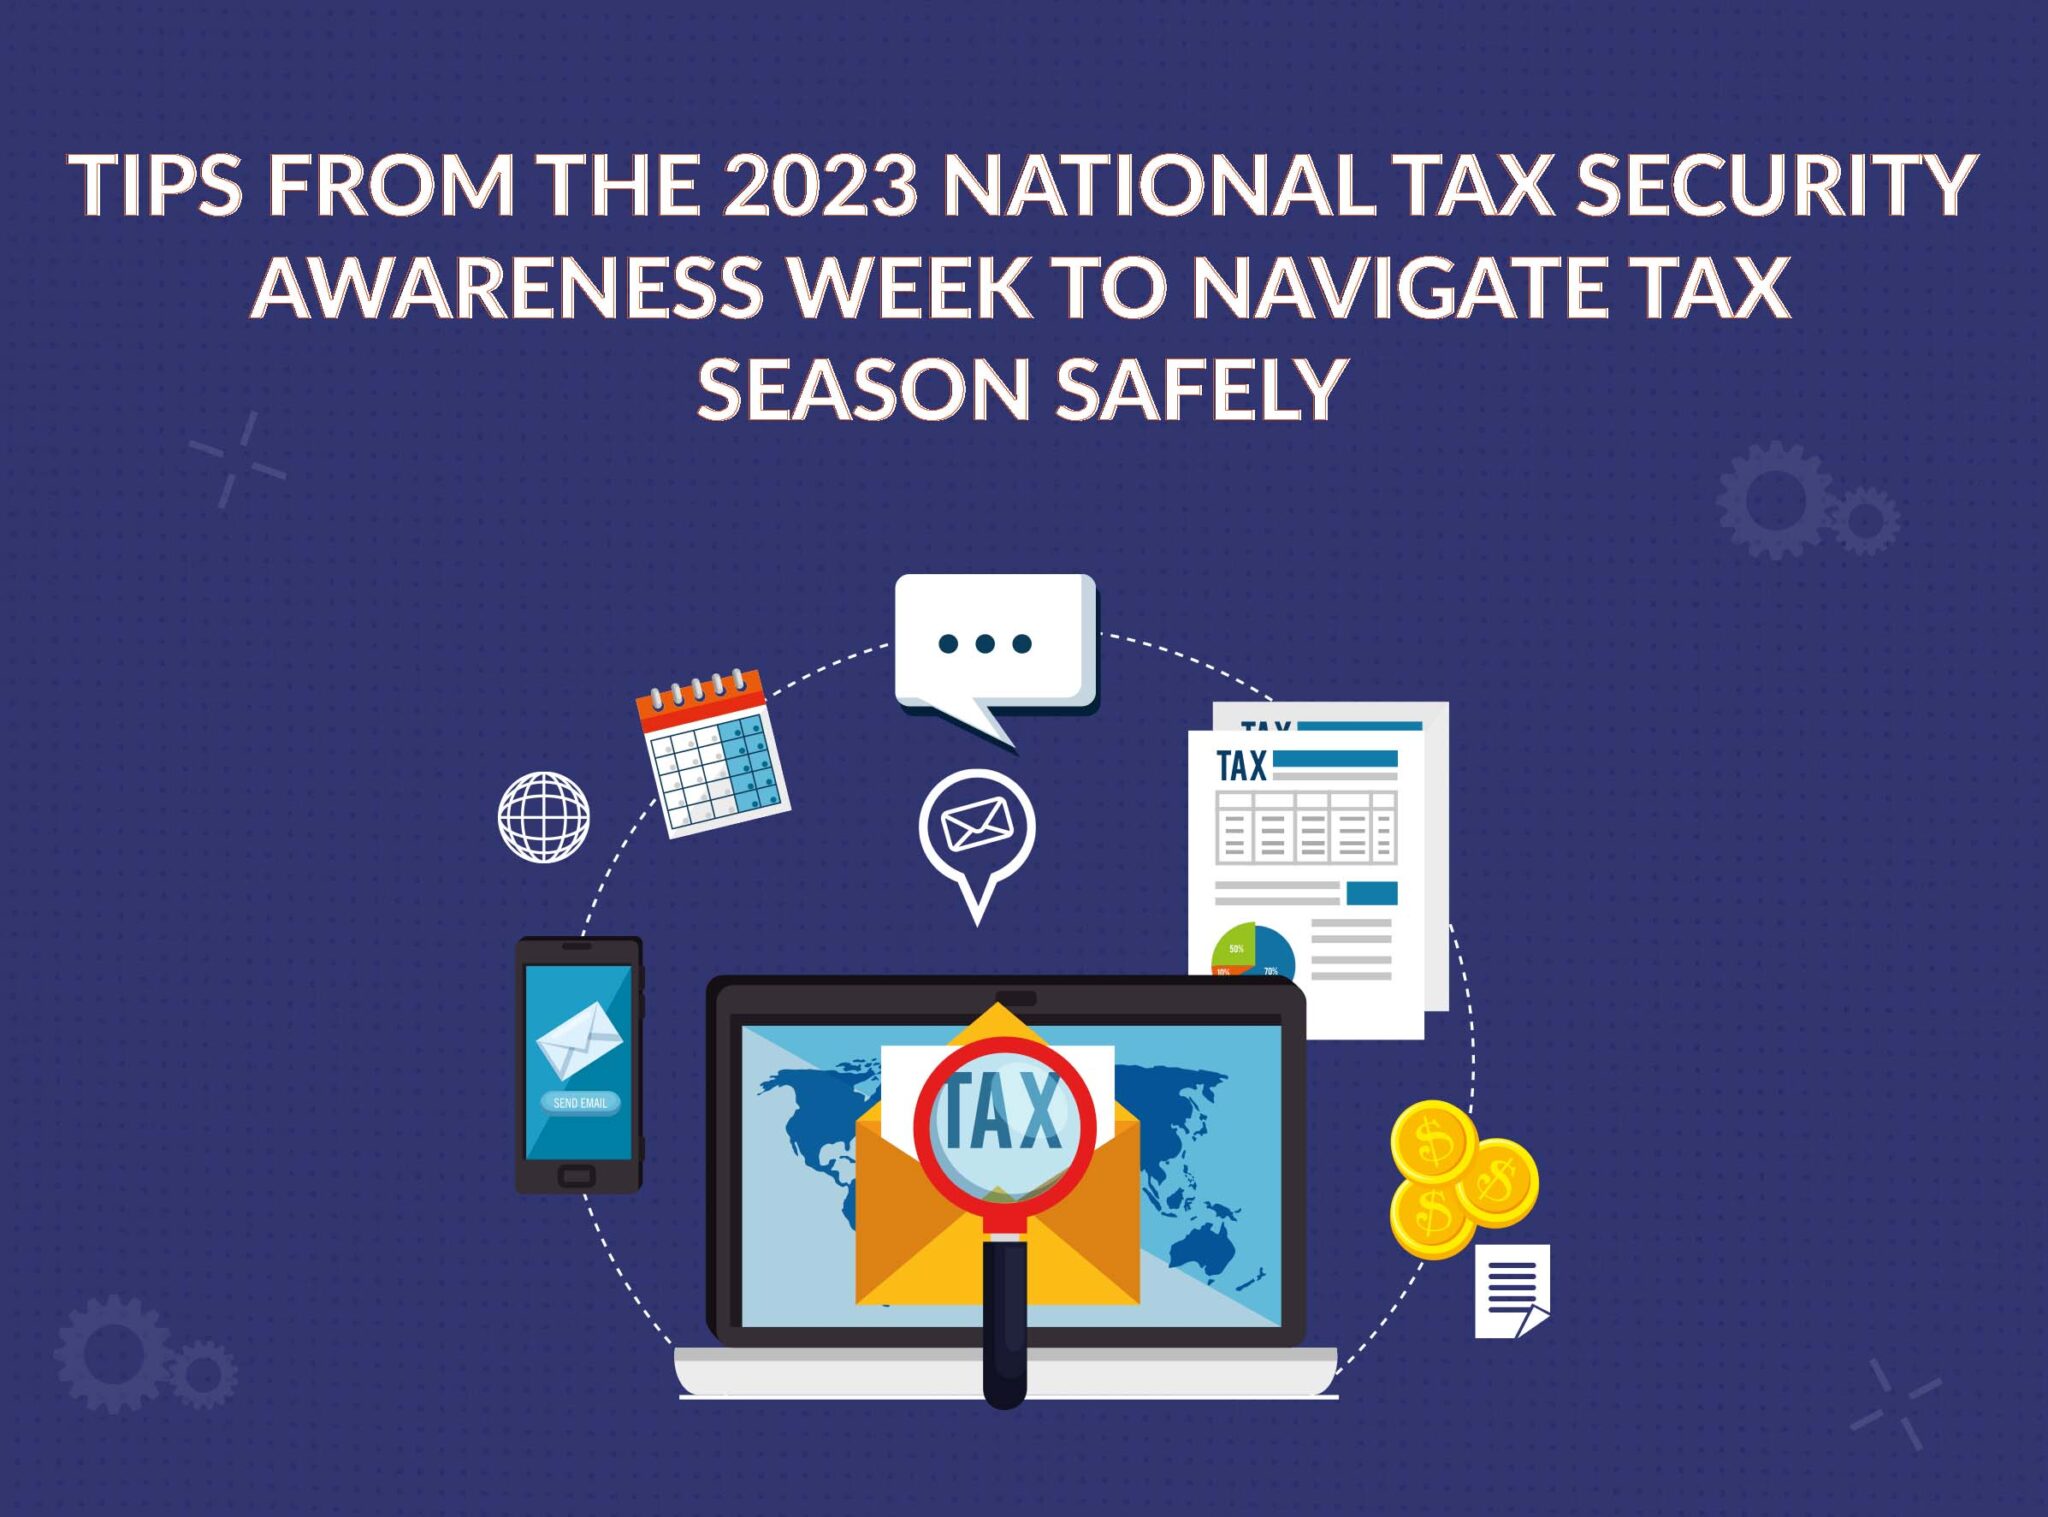 Tips from 2023 National Tax Security Awareness Week